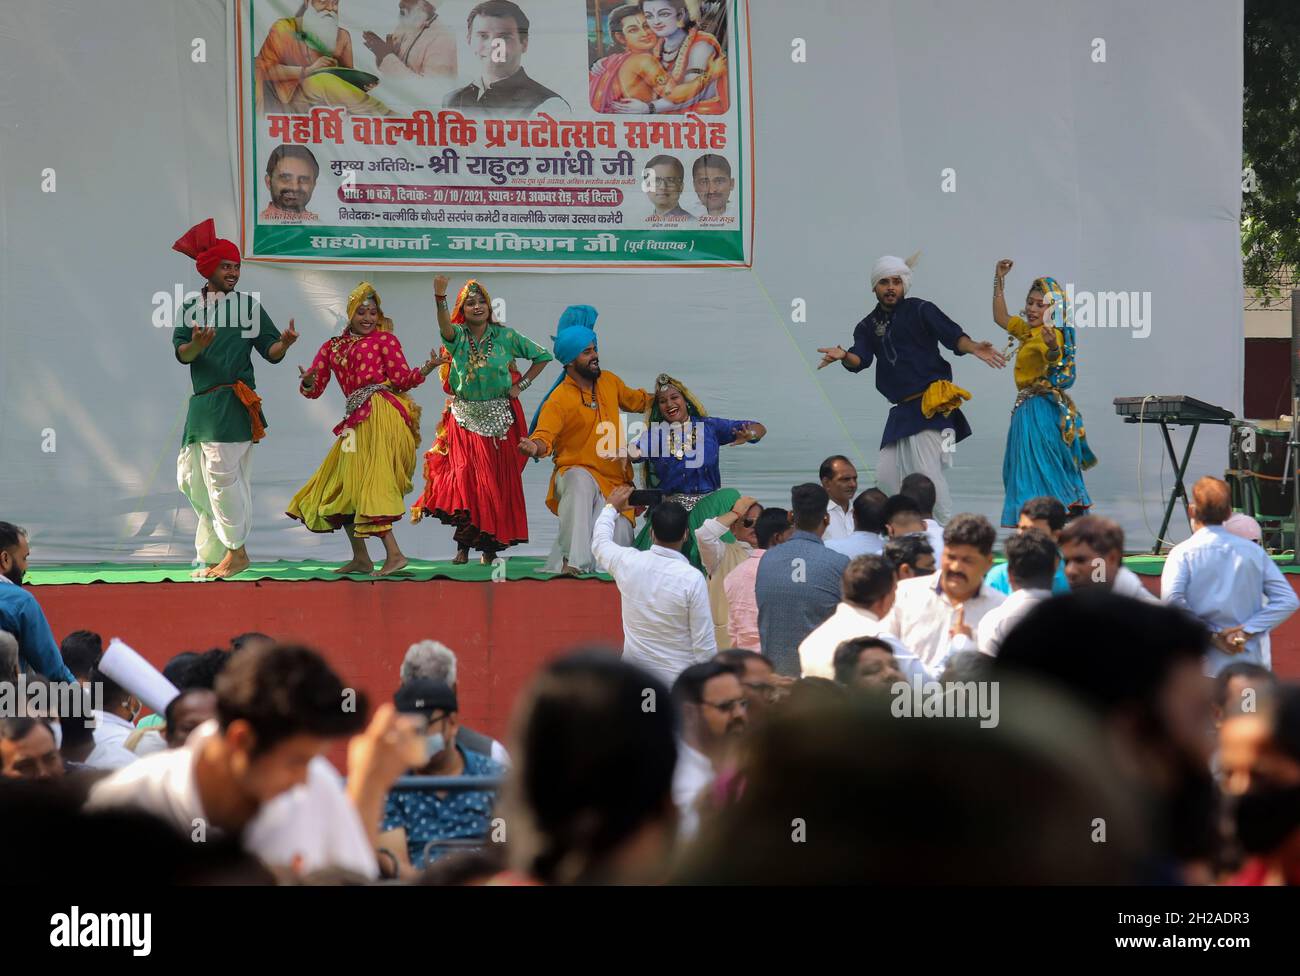 New Delhi, India. 20th Oct, 2021. Folk artists perform while supporters celebrate during the flag-off ceremony of Shobha Yatra on the occasion of Maharishi Valmiki Jayanti, at All India Congress Committee headquarter. Valmiki Jayanti, is an annual Indian festival celebrated in particular by the Balmiki religious group, to commemorate the birth of the ancient Indian poet and philosopher Valmiki. (Photo by Naveen Sharma/SOPA Images/Sipa USA) Credit: Sipa USA/Alamy Live News Stock Photo